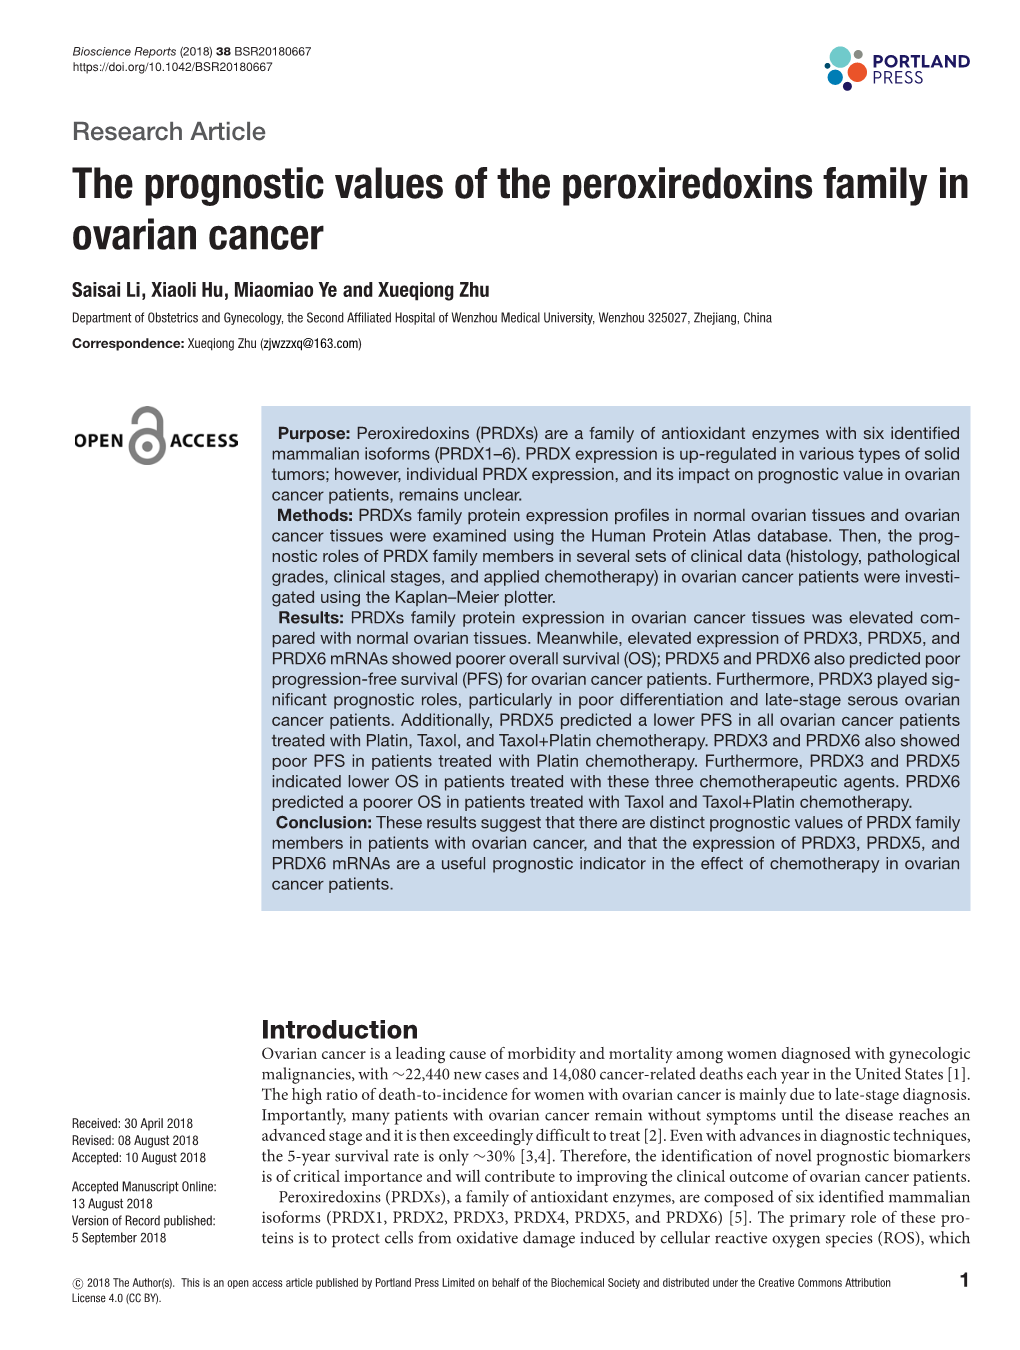 The Prognostic Values of the Peroxiredoxins Family in Ovarian Cancer